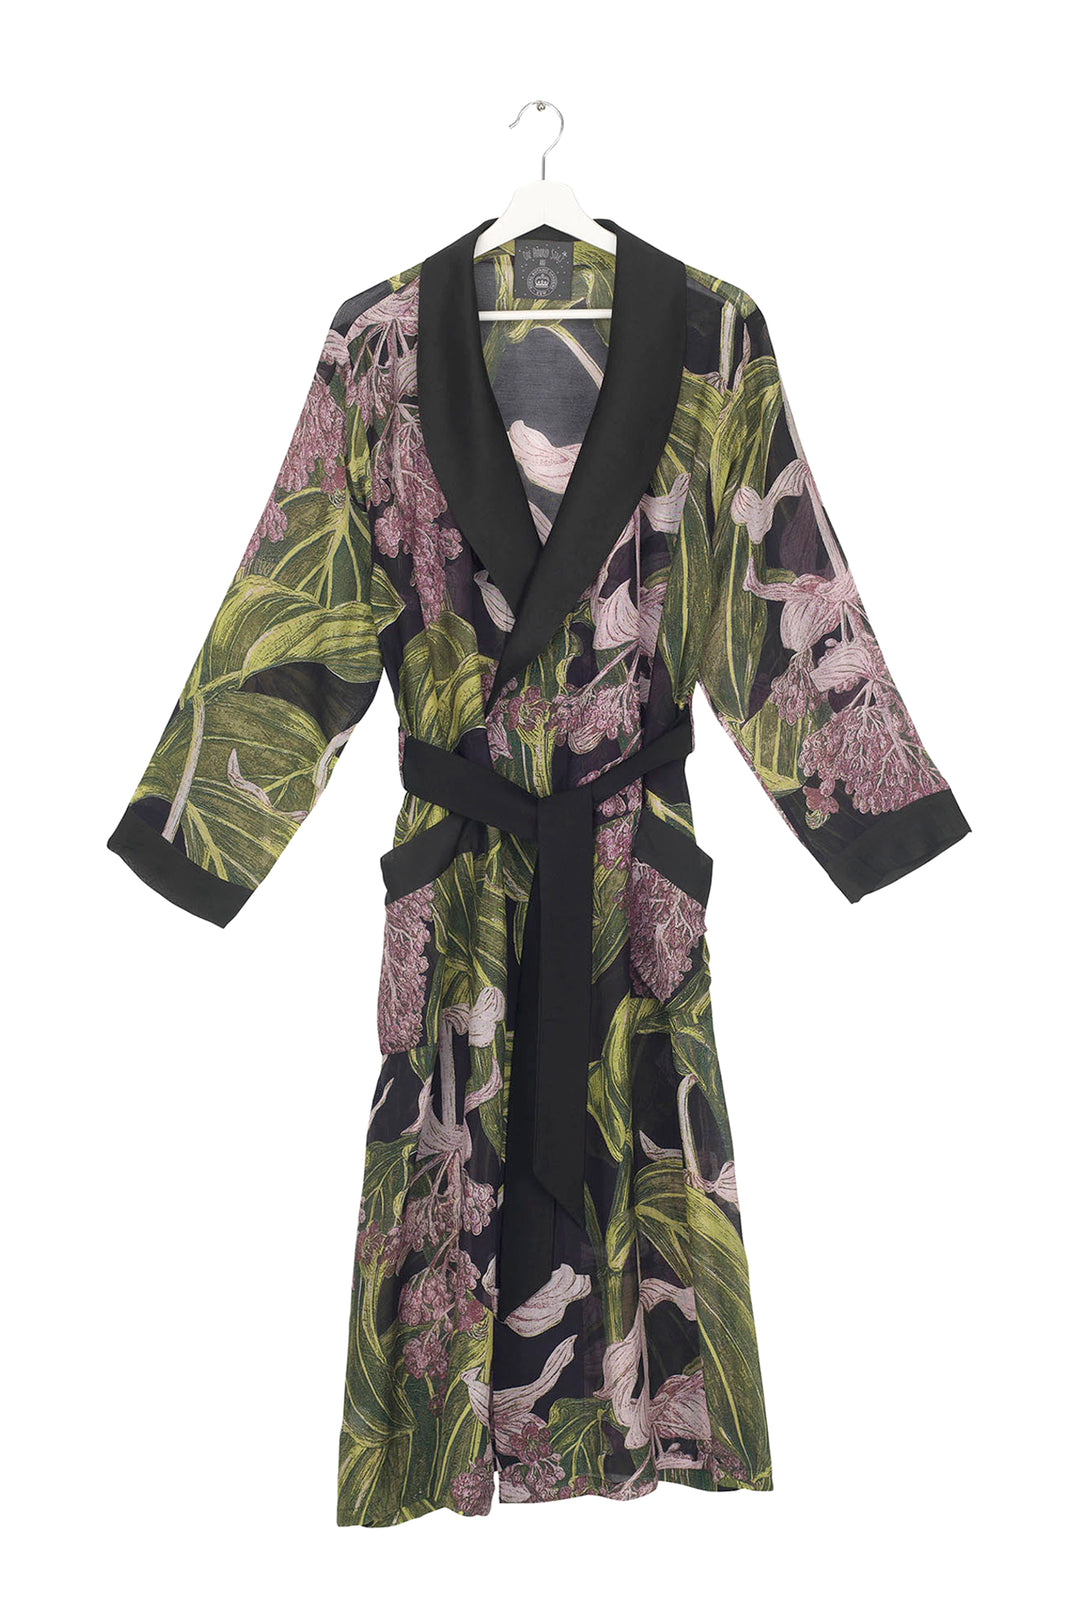 Marianne North Medinilla Gown- This gown is perfect as a luxurious house coat or for layering as a chic accessory to your favourite outfit.